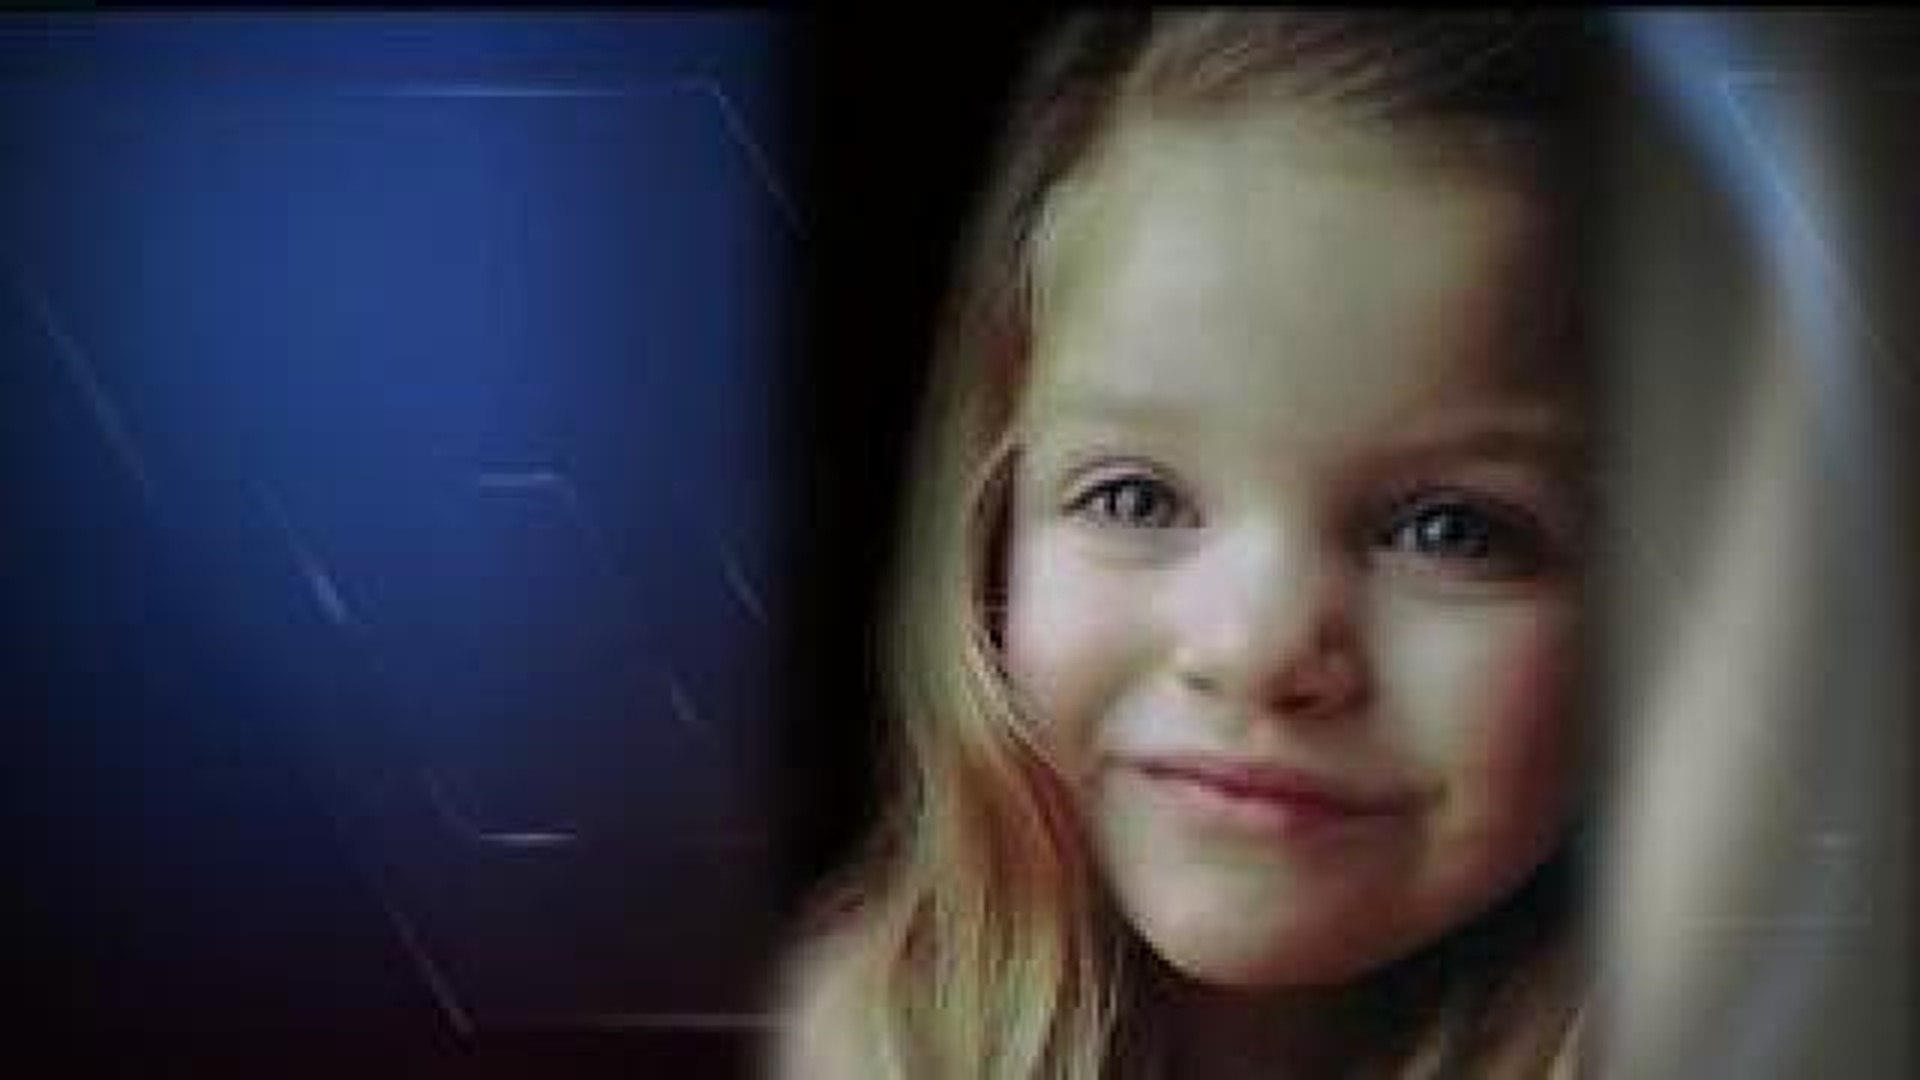 Four-year-old succumbs to injuries after being hit by car in Rock Island